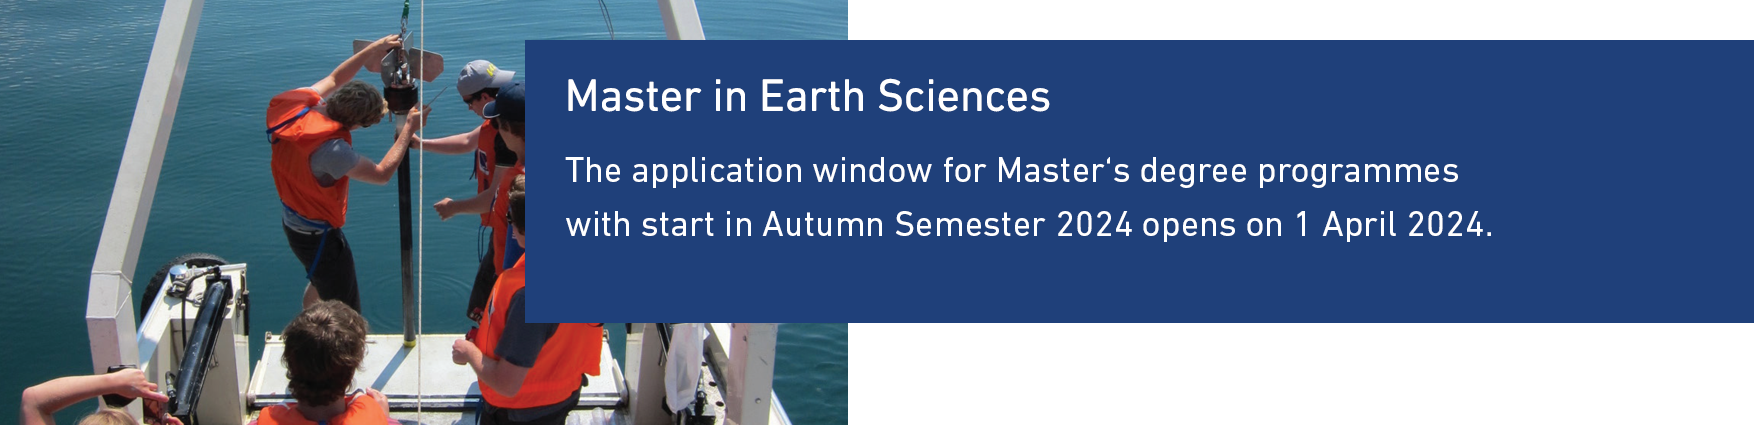 Master in Earth Sciences